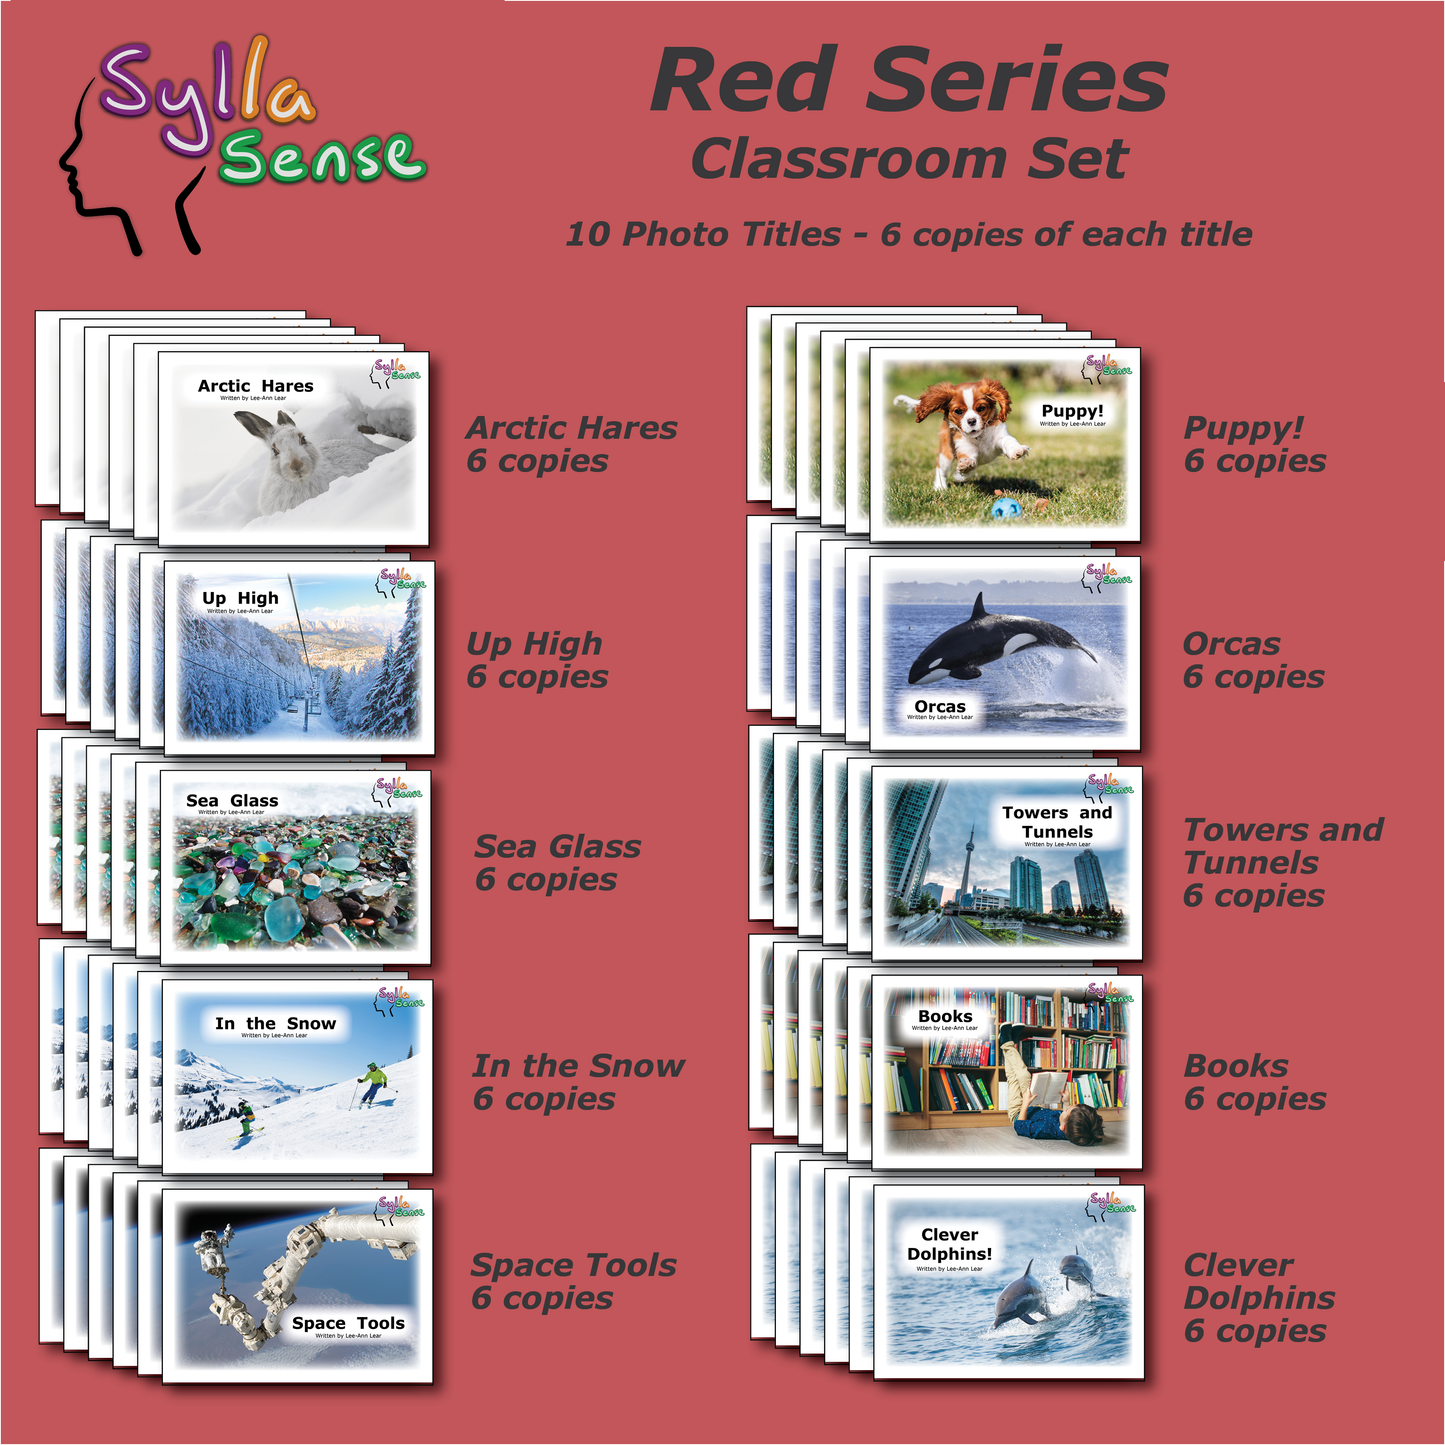 Red Series - Classroom Set